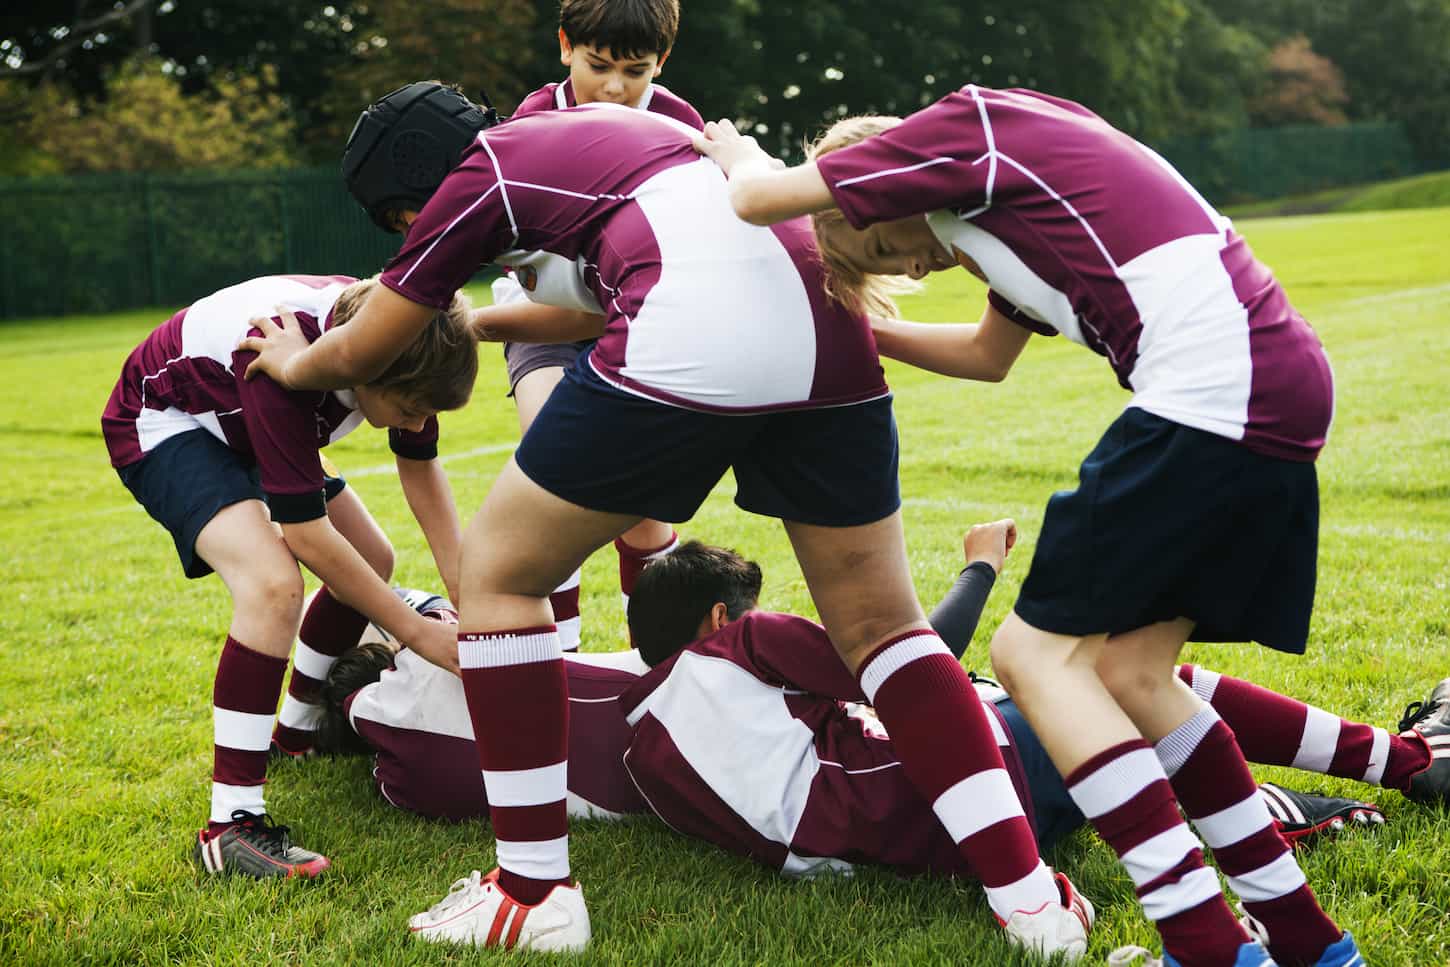 An image of Teenage schoolboy rugby team playing aggressively.